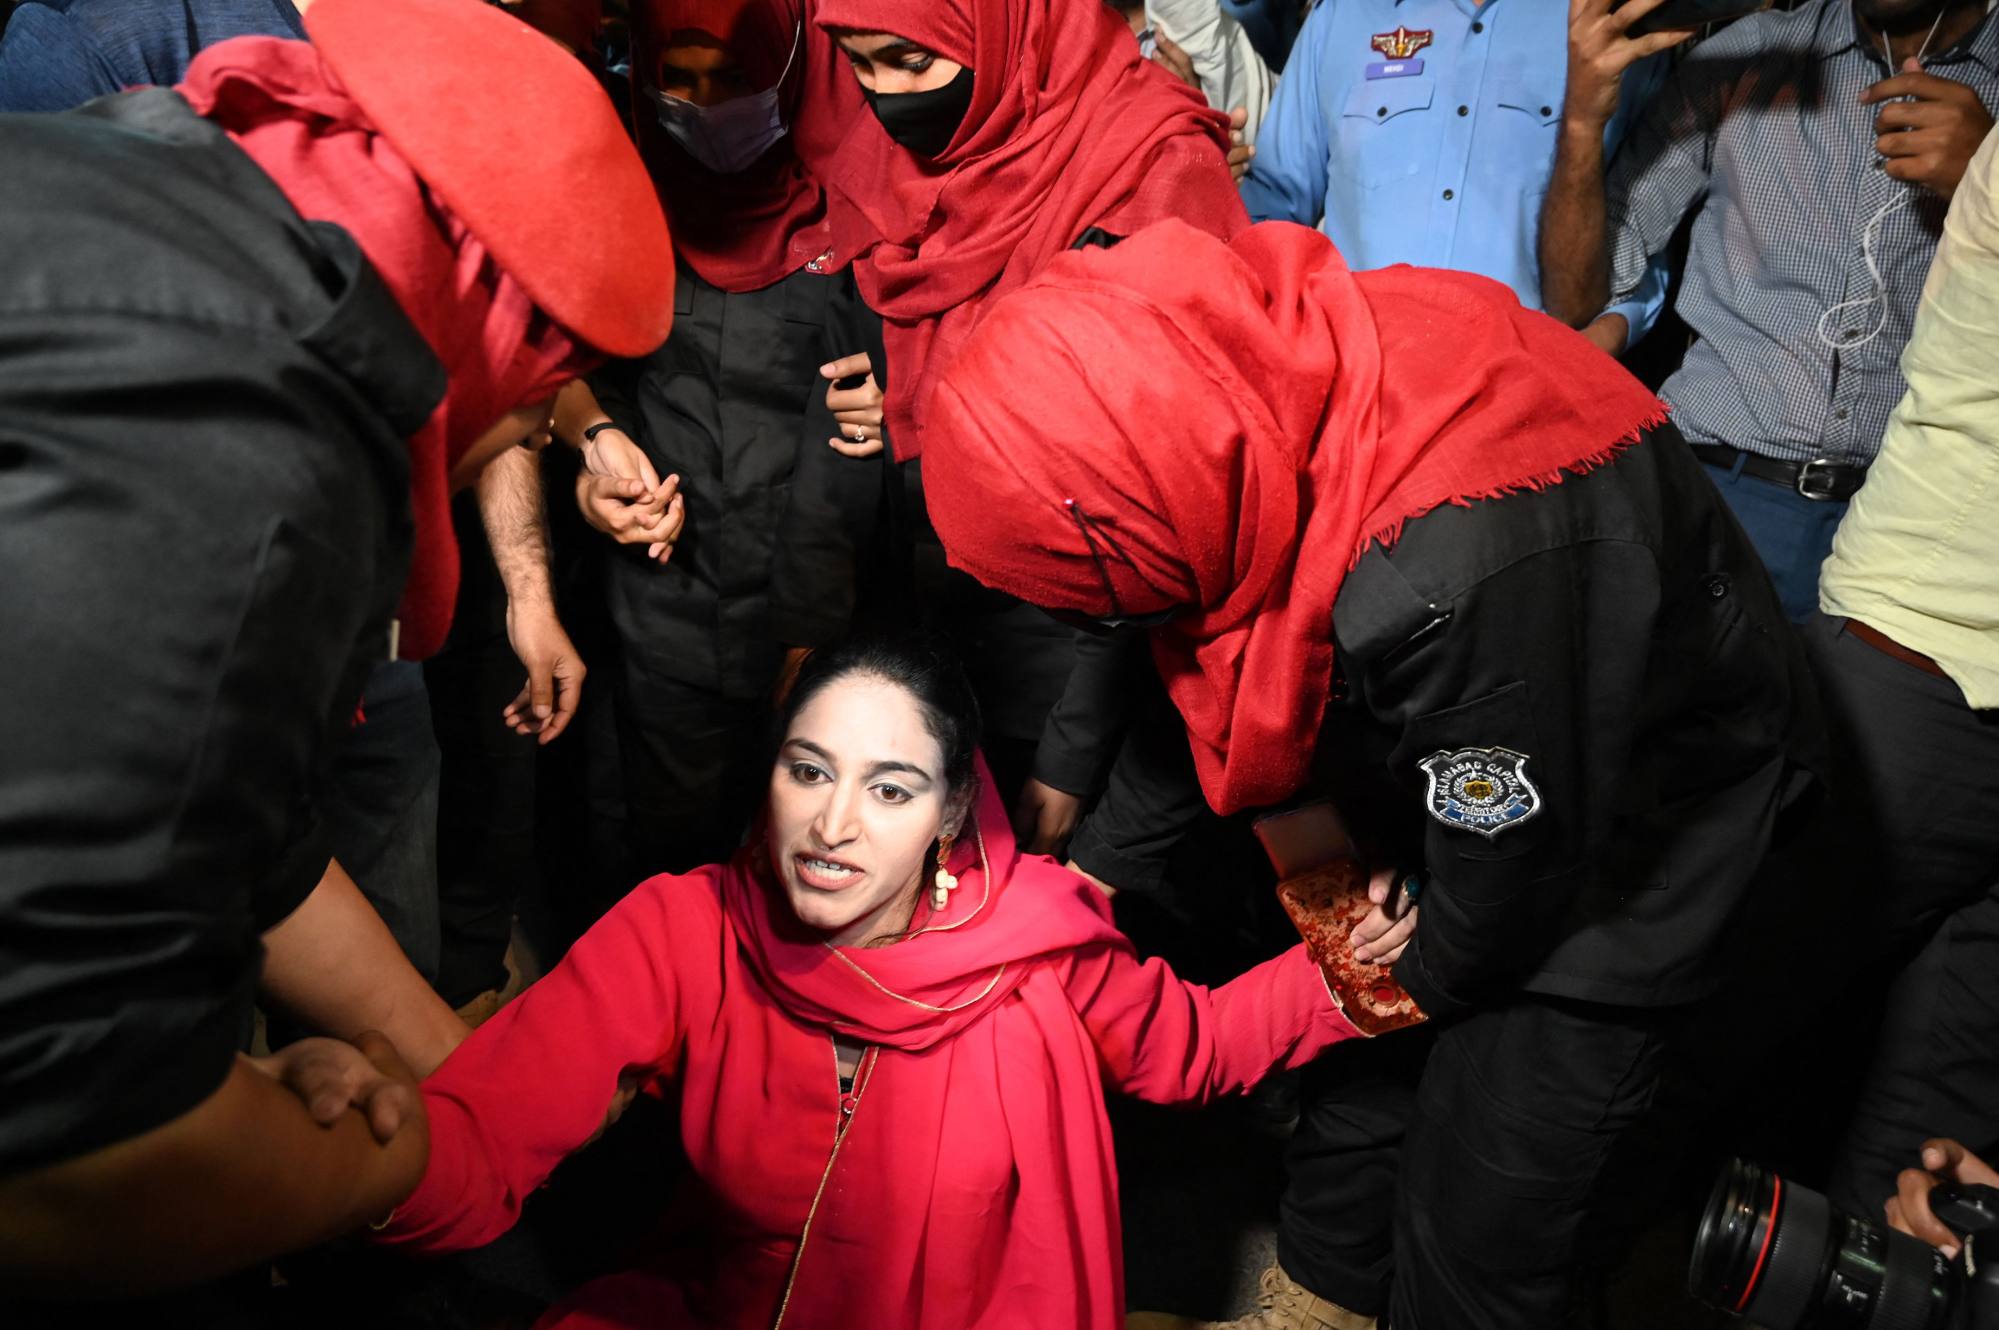 Female police officers detain a supporter of Pakistan Tehreek-e-Insaf (PTI) party outside the parliament house building in Islamabad, Pakistan on April 9. Photo: AFP